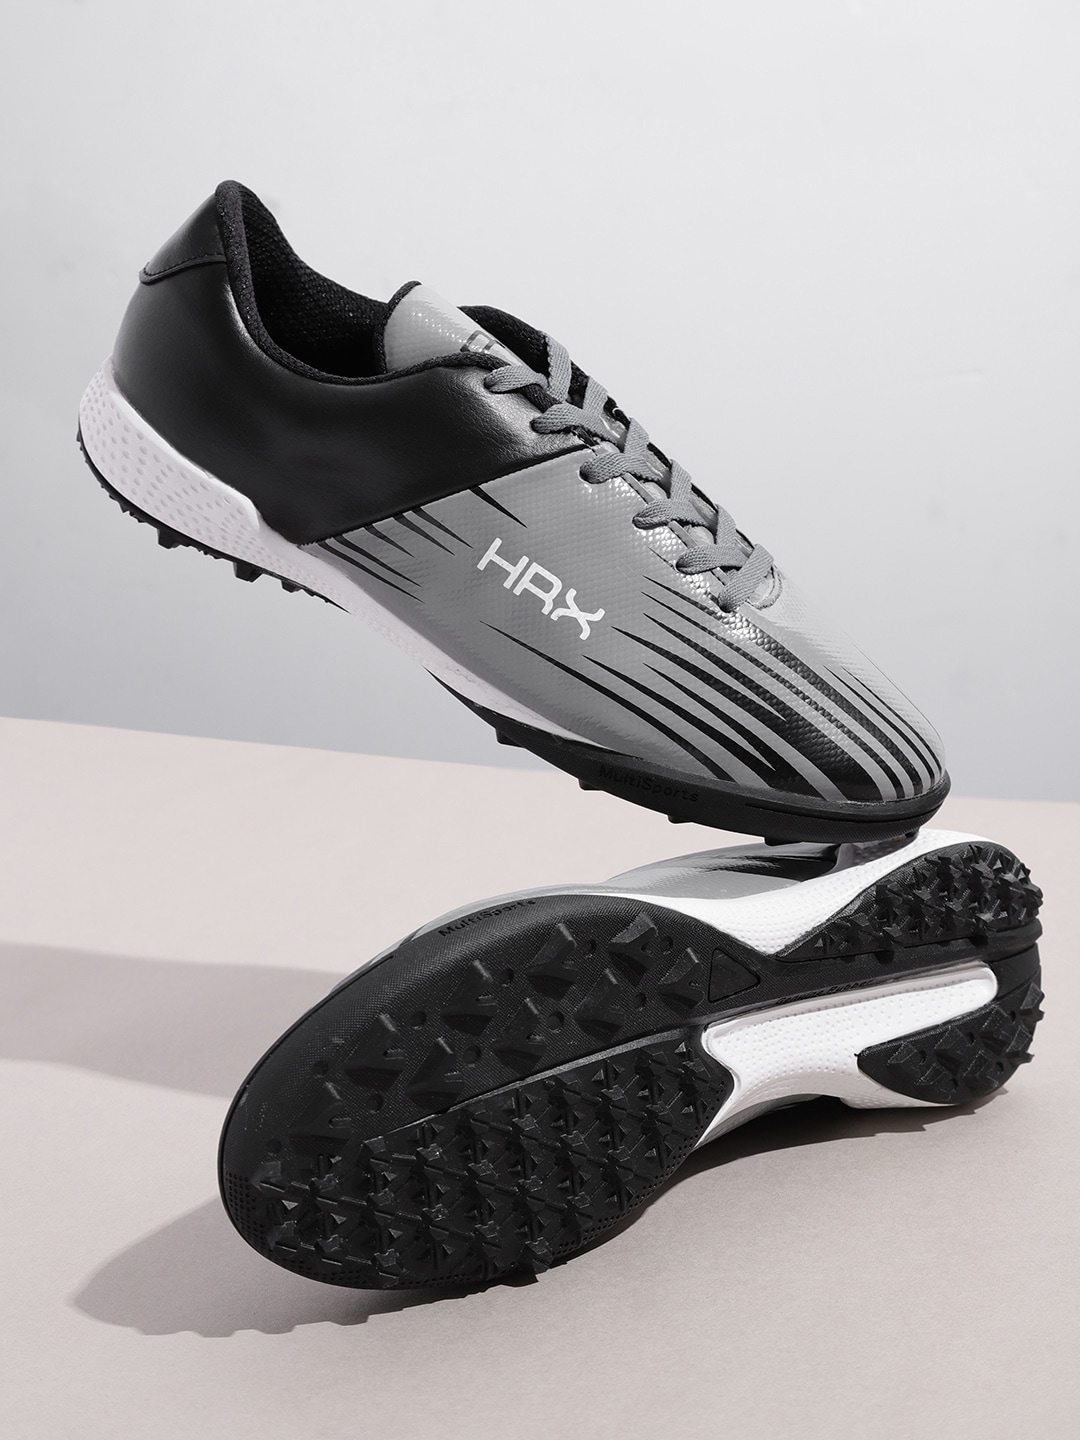 HRX by Hrithik Roshan Unisex Grey & Black Football Shoes Price in India